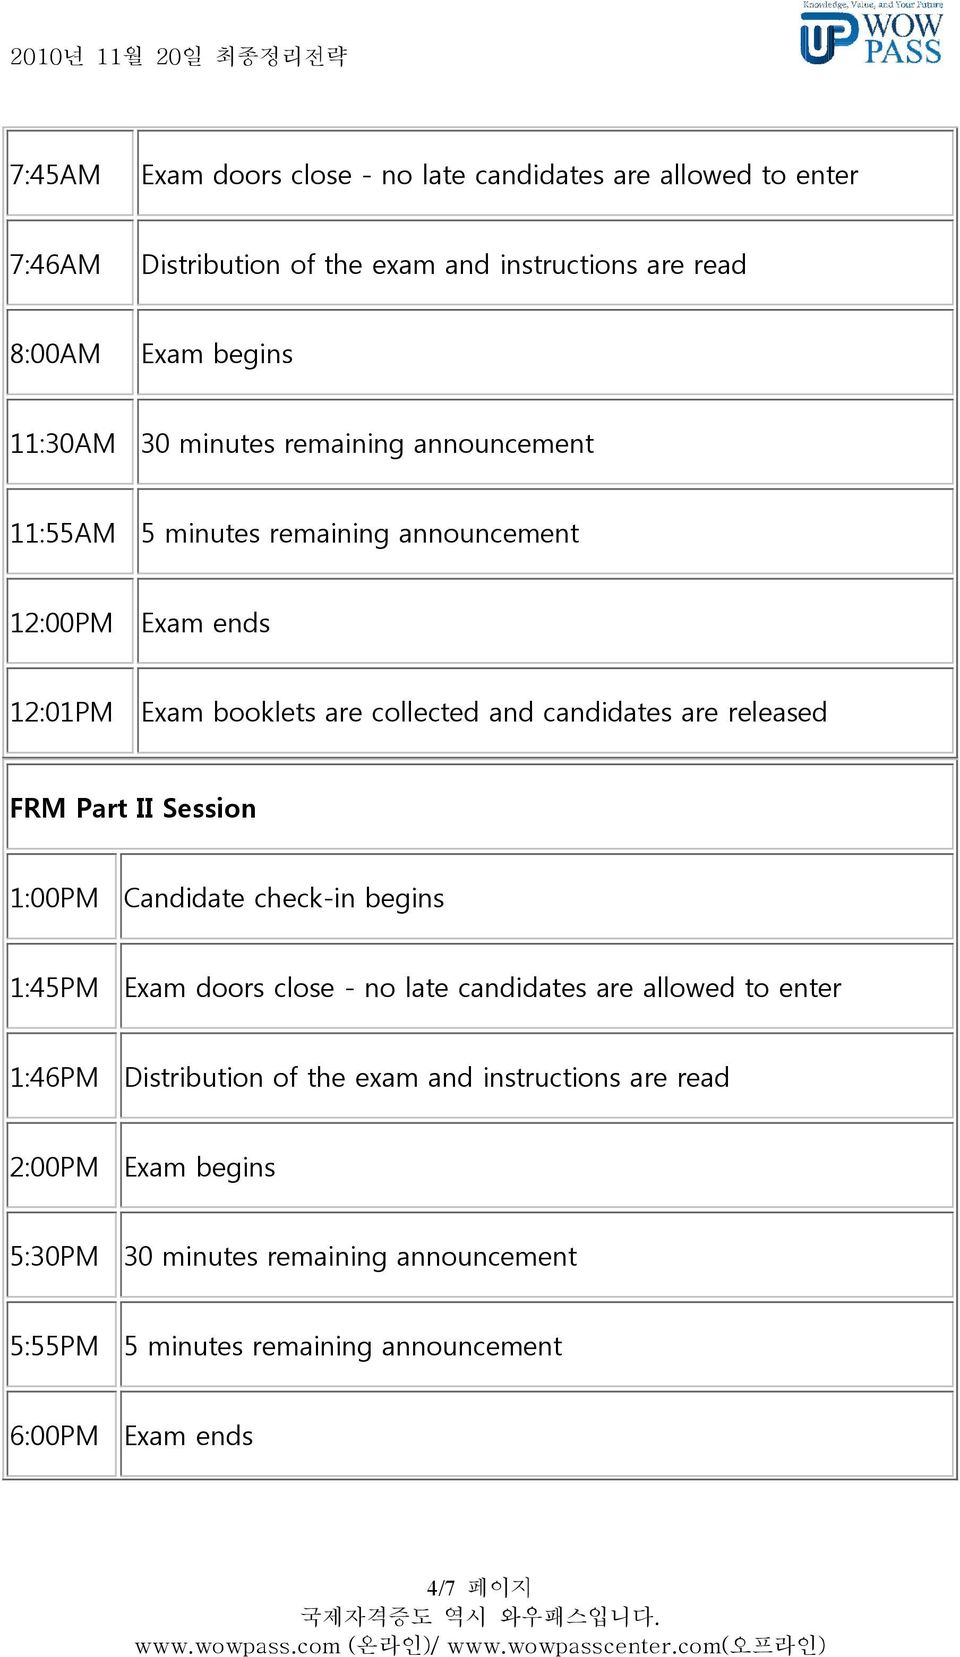 released FRM Part II Session 1:00PM Candidate check-in begins 1:45PM Exam doors close - no late candidates are allowed to enter 1:46PM Distribution of